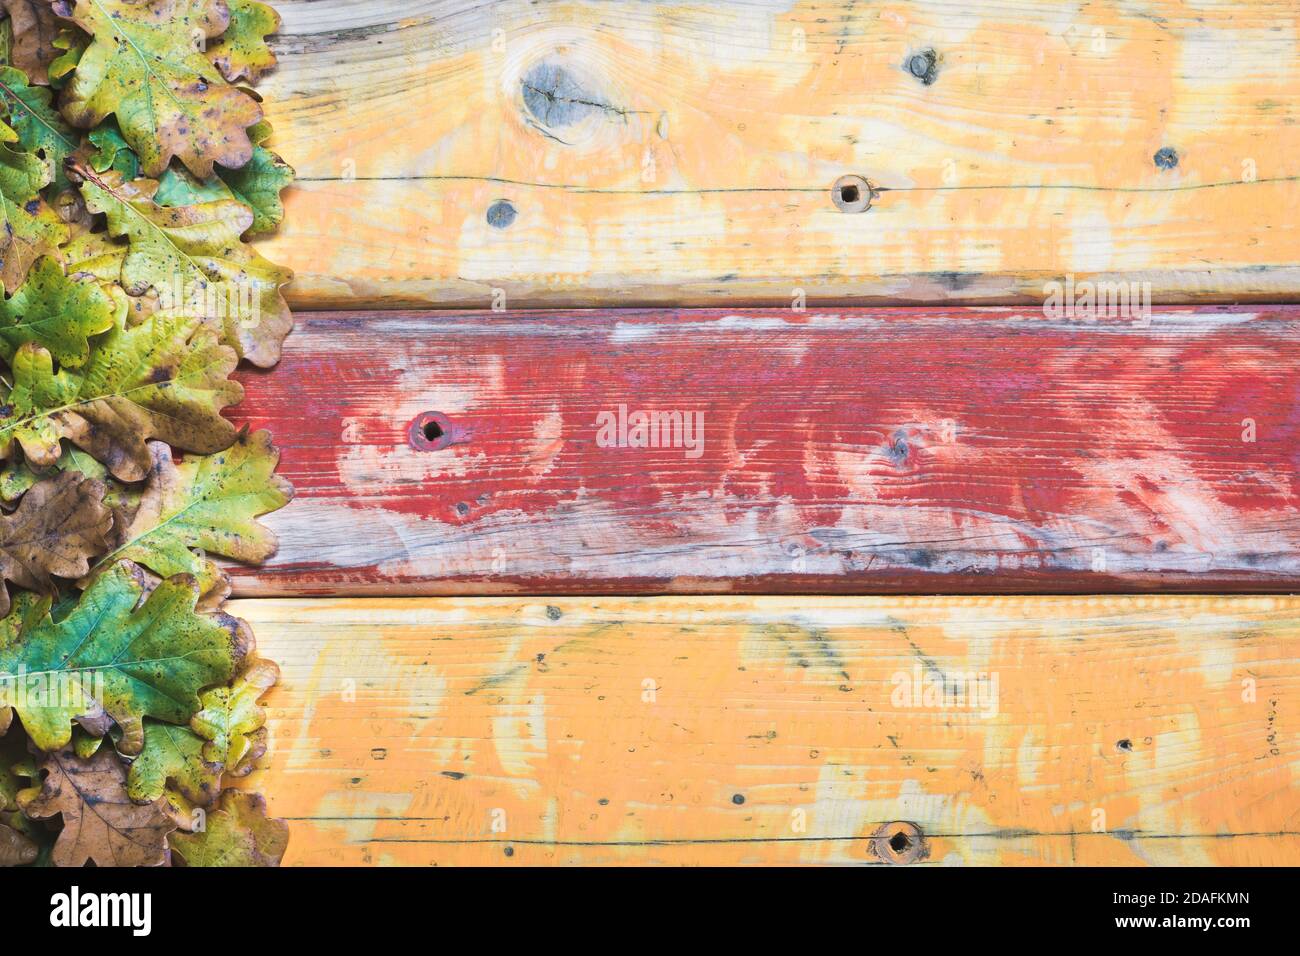 Old wood colorful background with oak leaves on the side. Yellow and red old weathered wooden boards. Space for copy text. Stock Photo